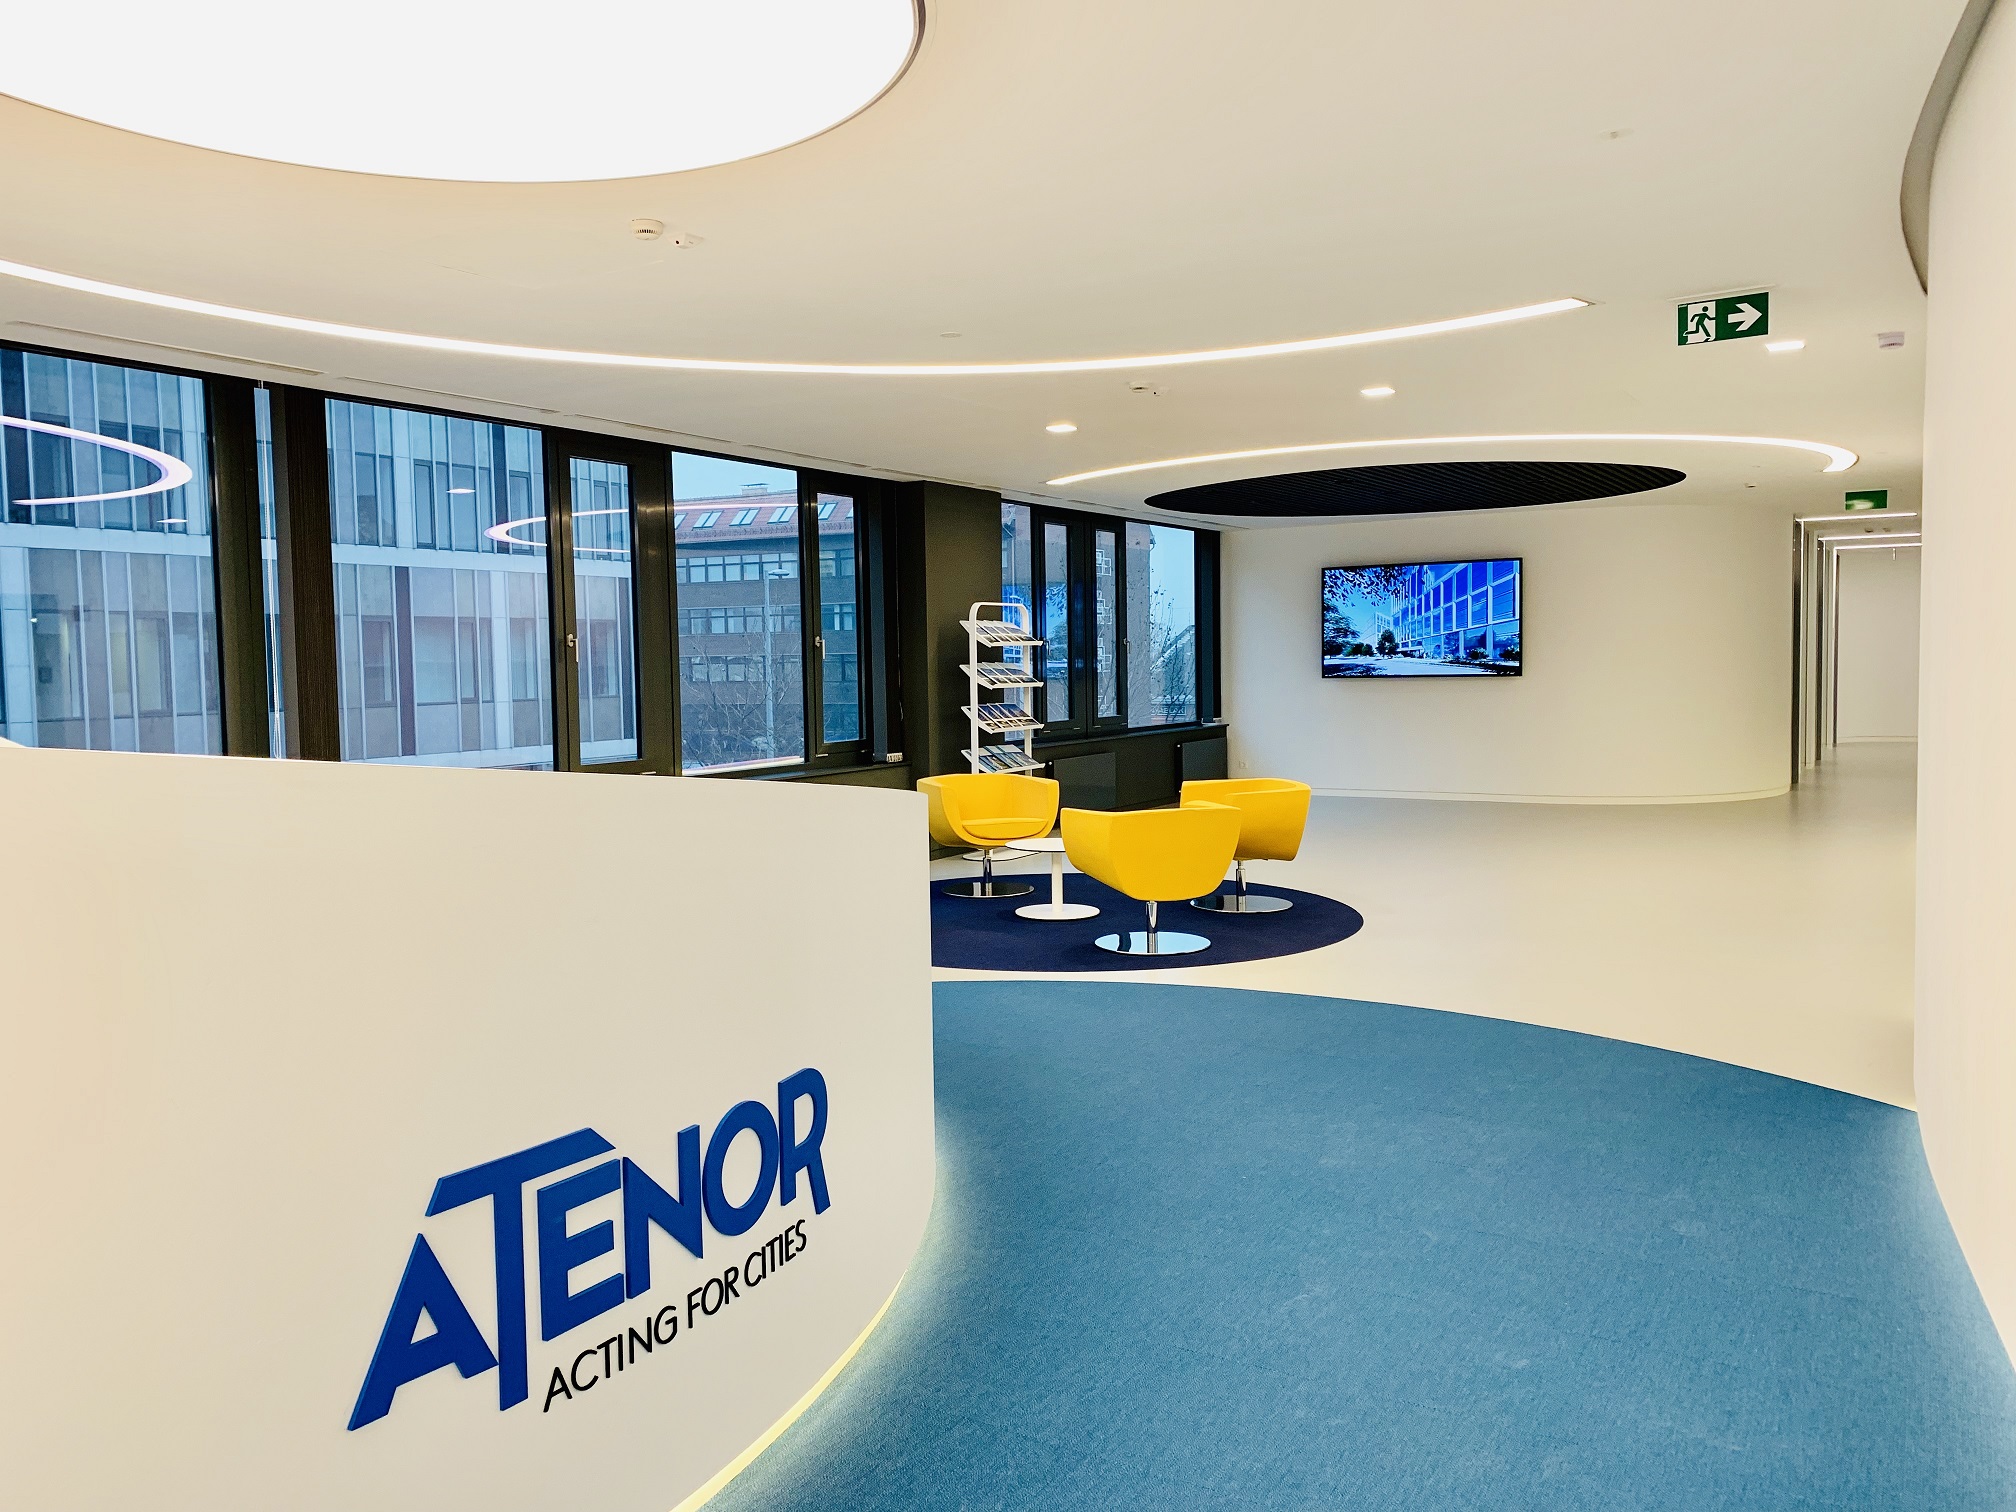 Atenor Hungary Dynamically Expands, Its Developments Advance At A Fast Pace